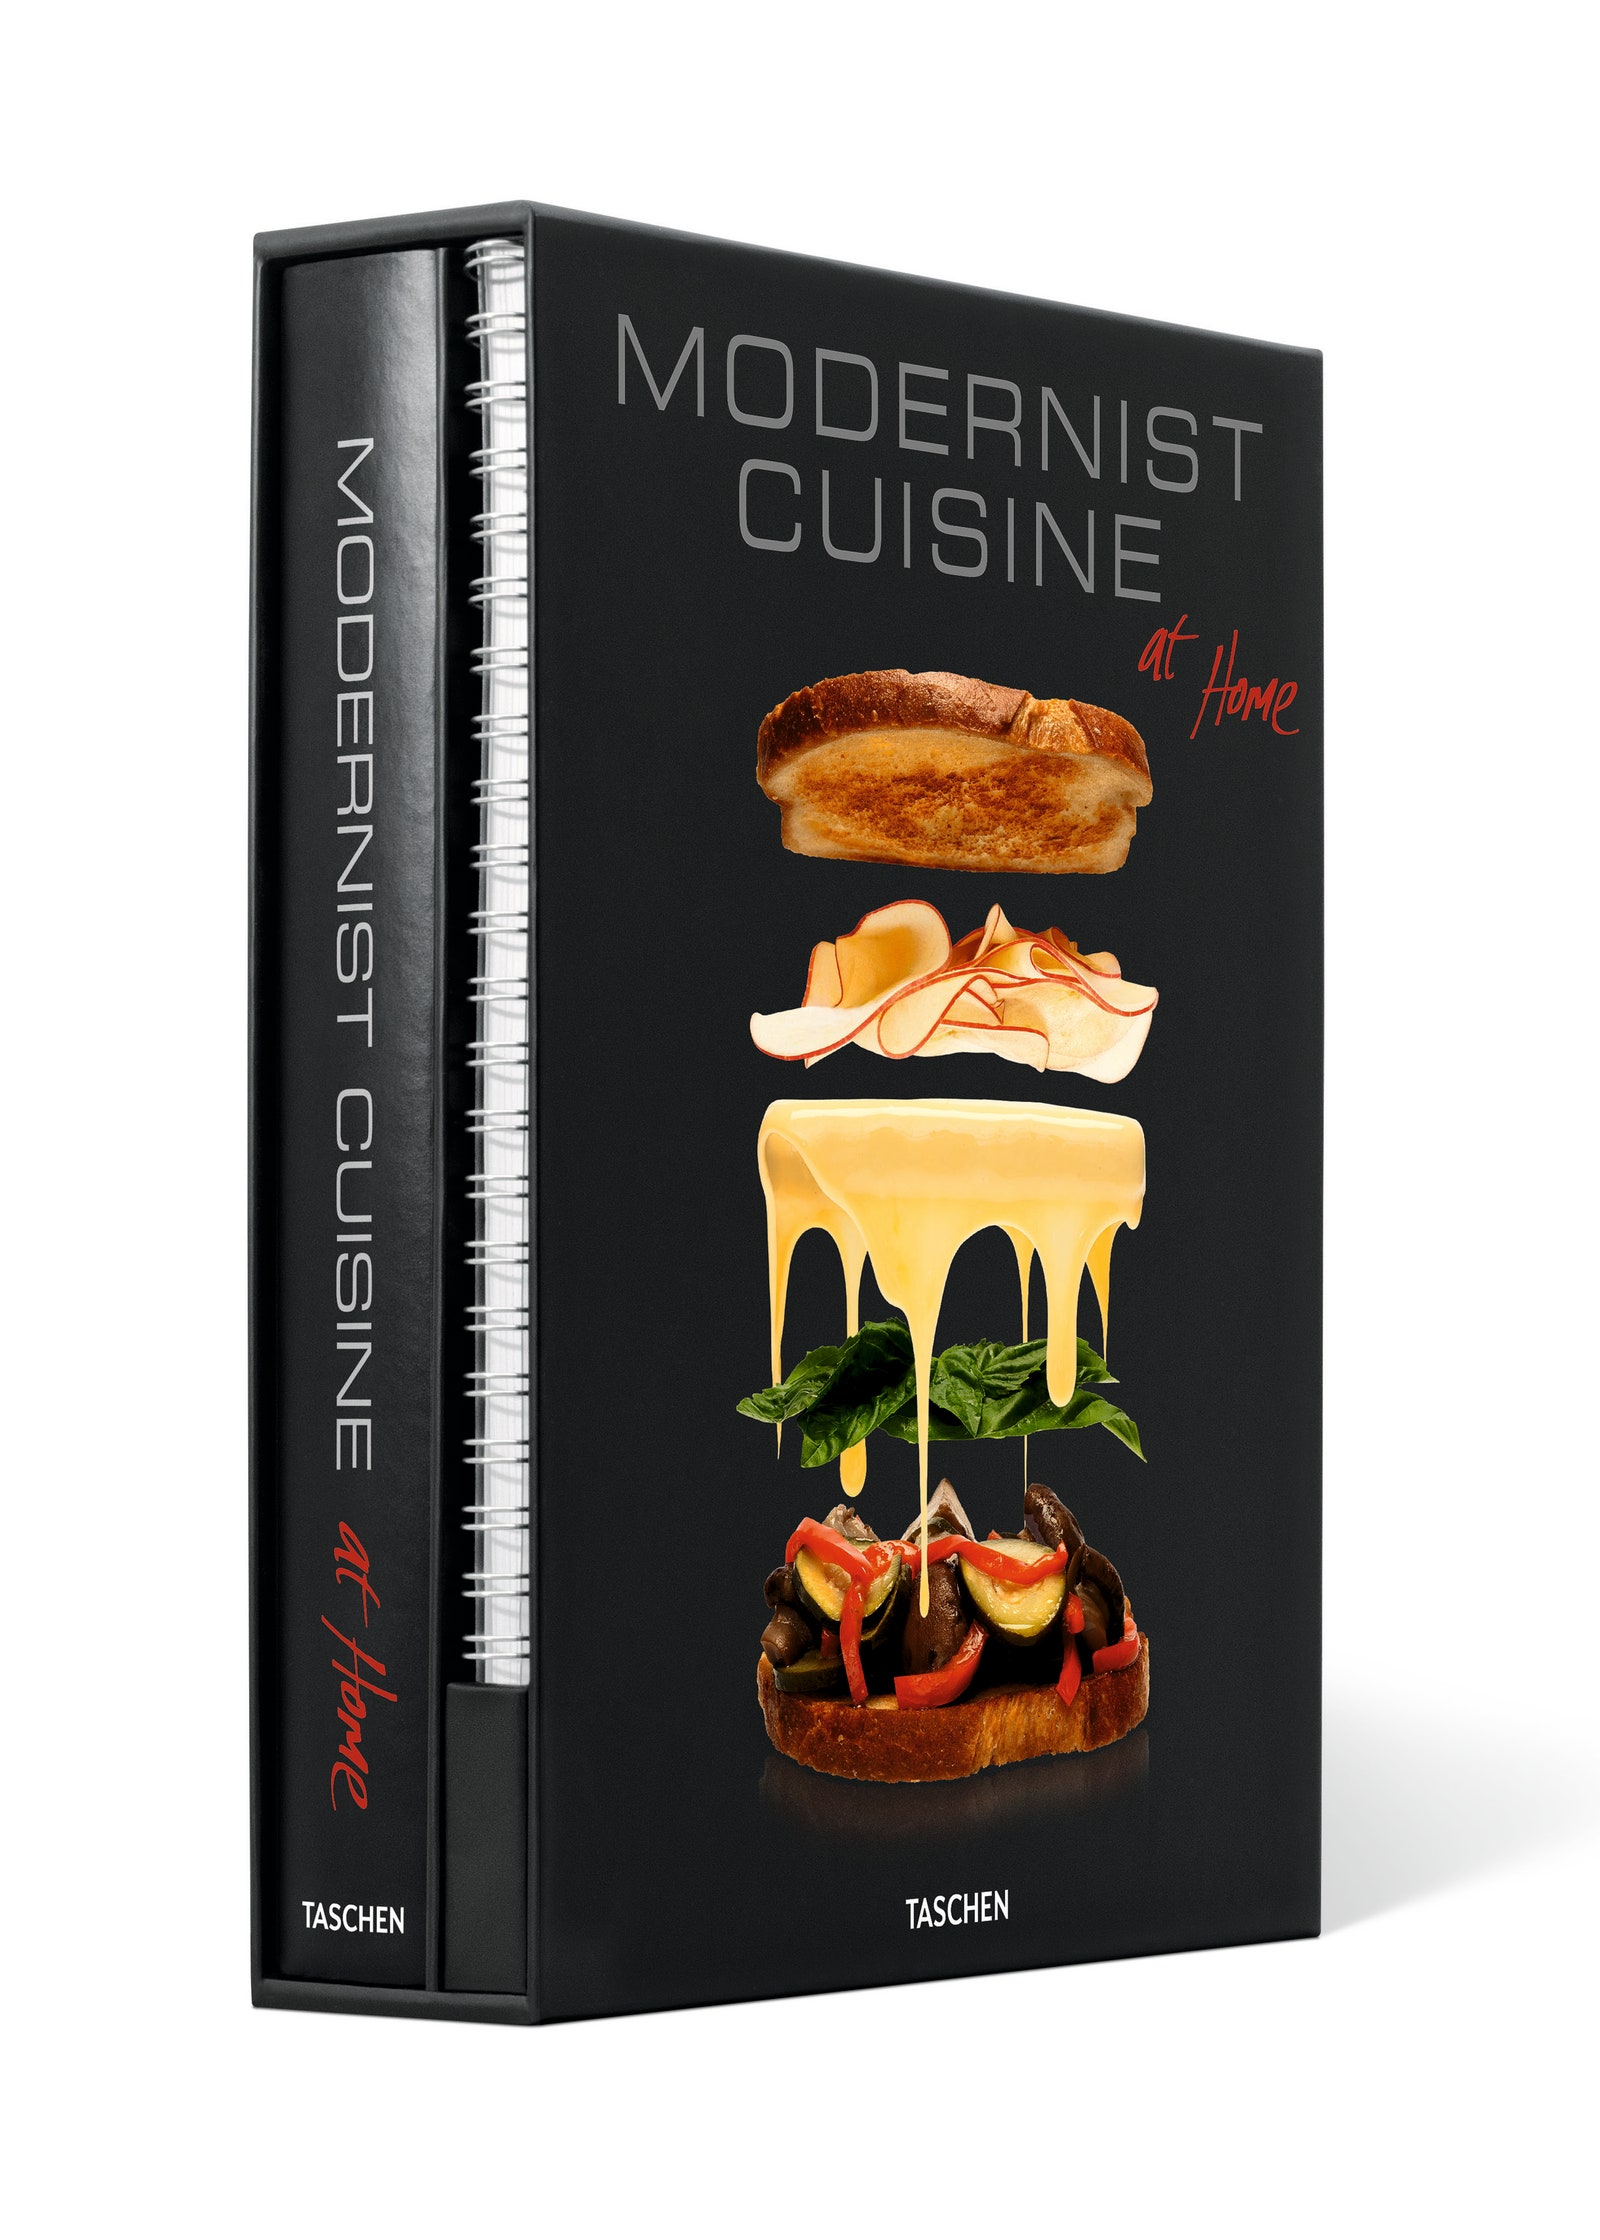 Пятитомник Modernist Cuisine The Art and Science of Cooking Taschen.